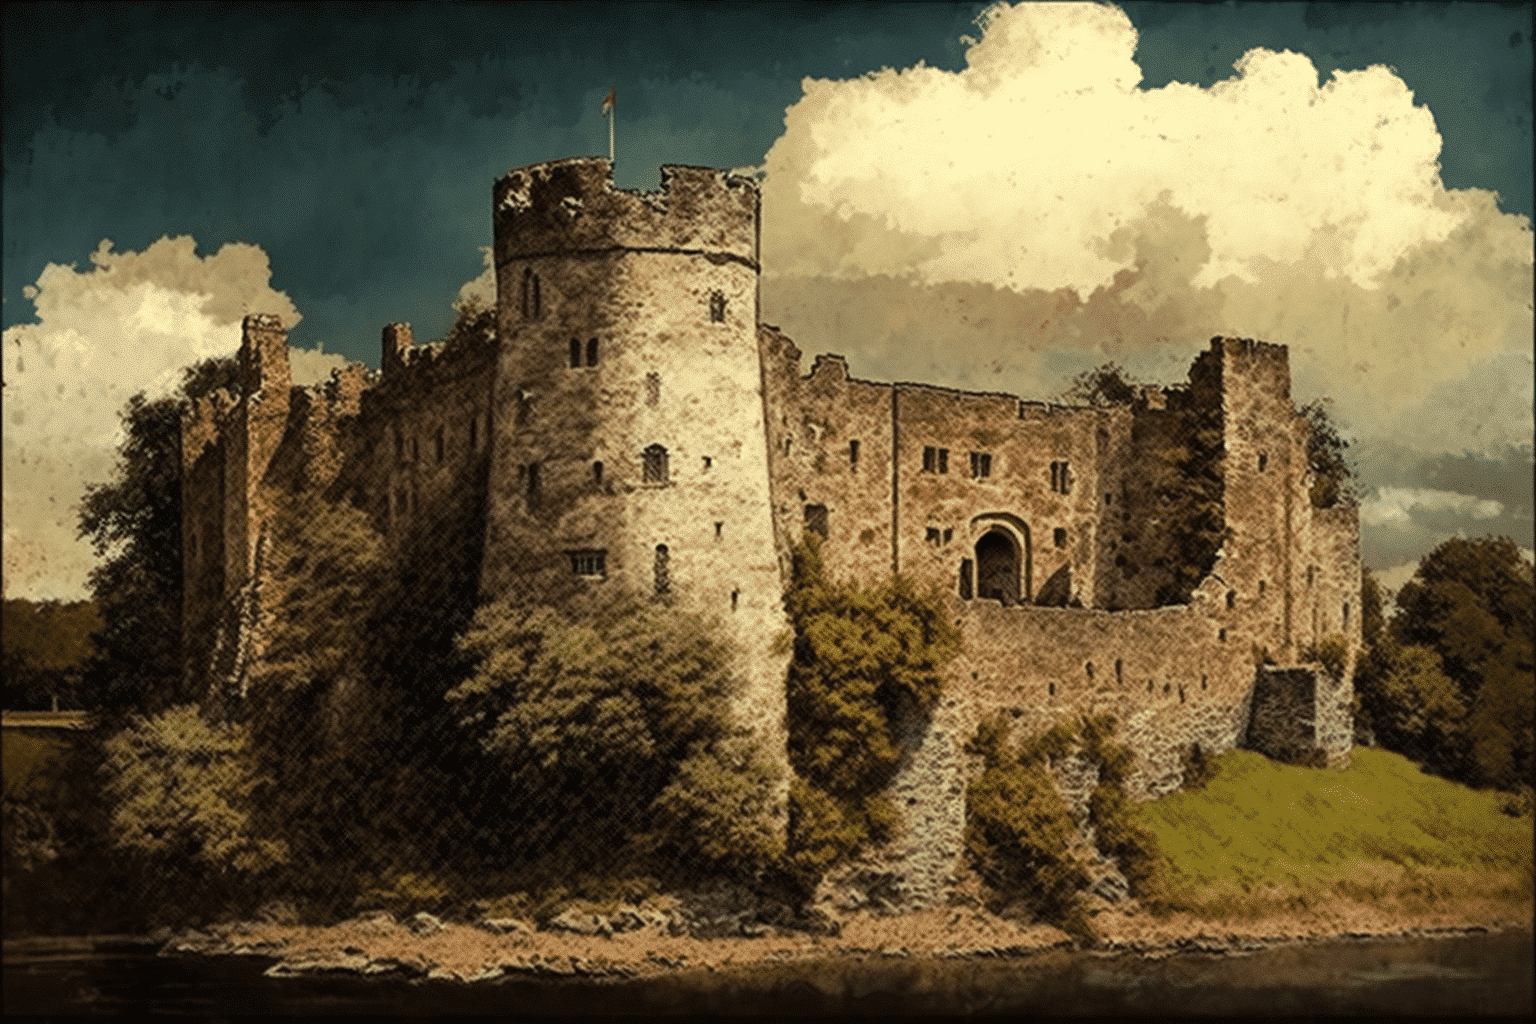 iconic-chepstow-castle-painting-by-turner-set-to-make-its-return-to-wales